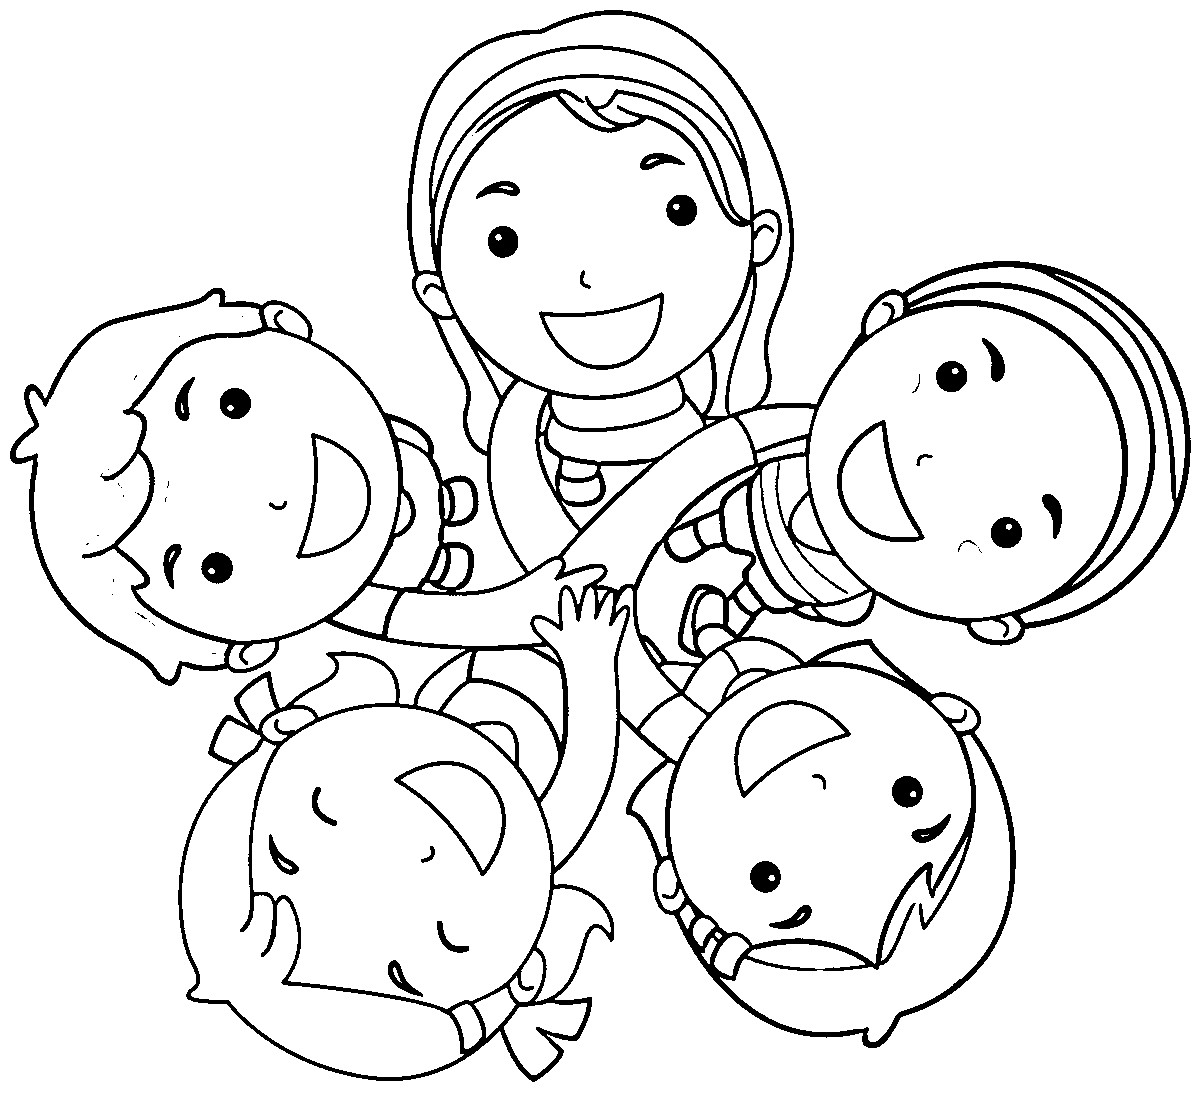 Friendship Coloring Pages For Girls
 Friendship Coloring Pages Best Coloring Pages For Kids